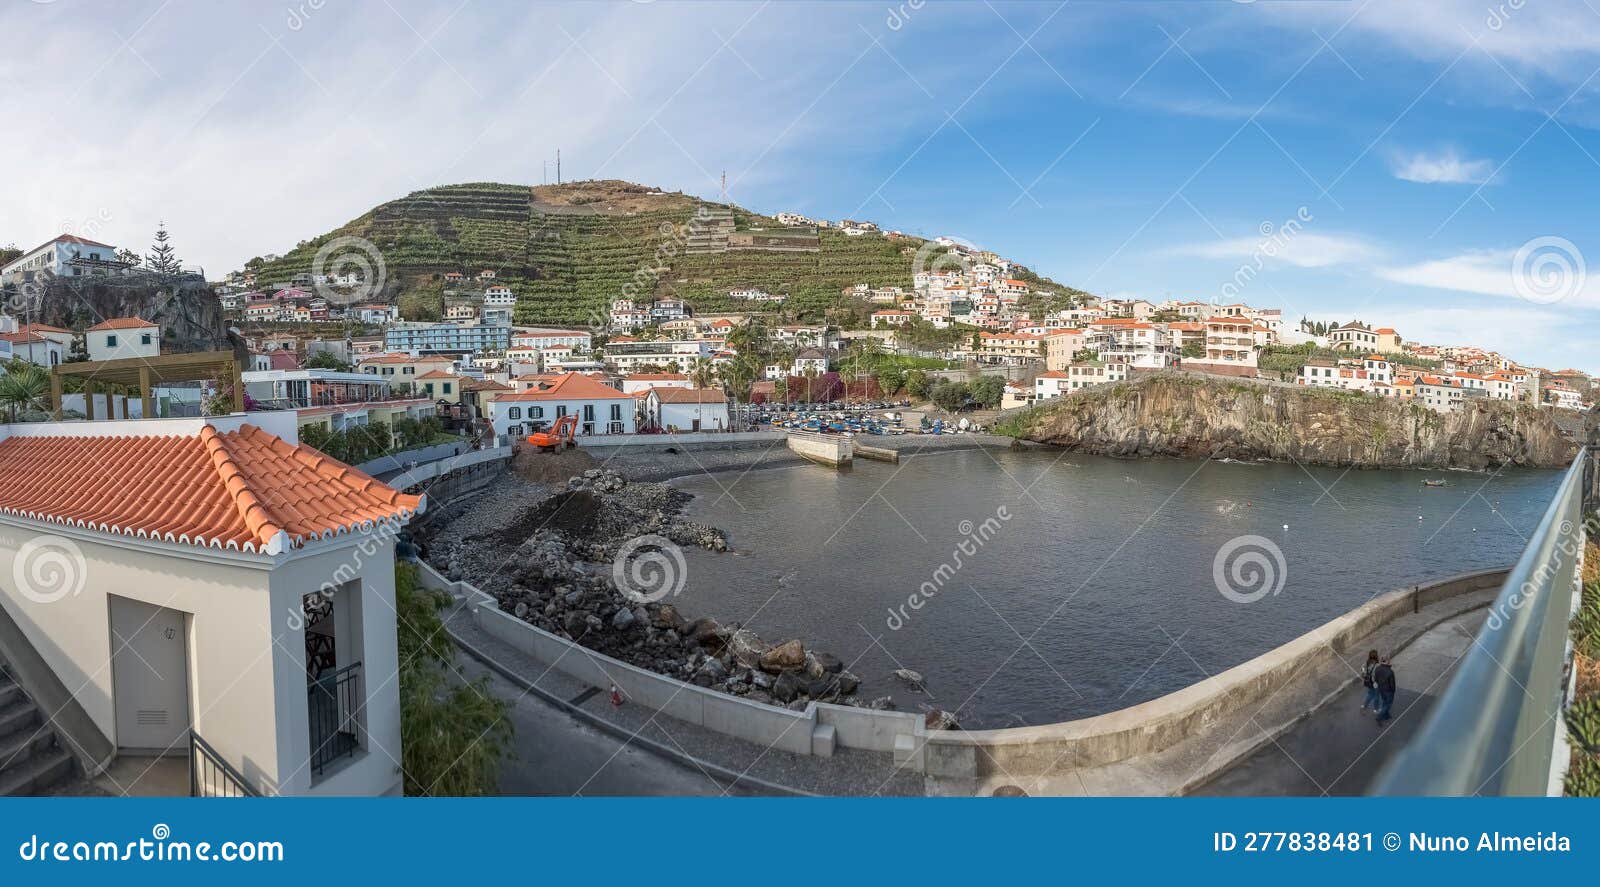 panoramic view cÃ¢mara do lobos bay and harbour, a small touristic fisherman's village